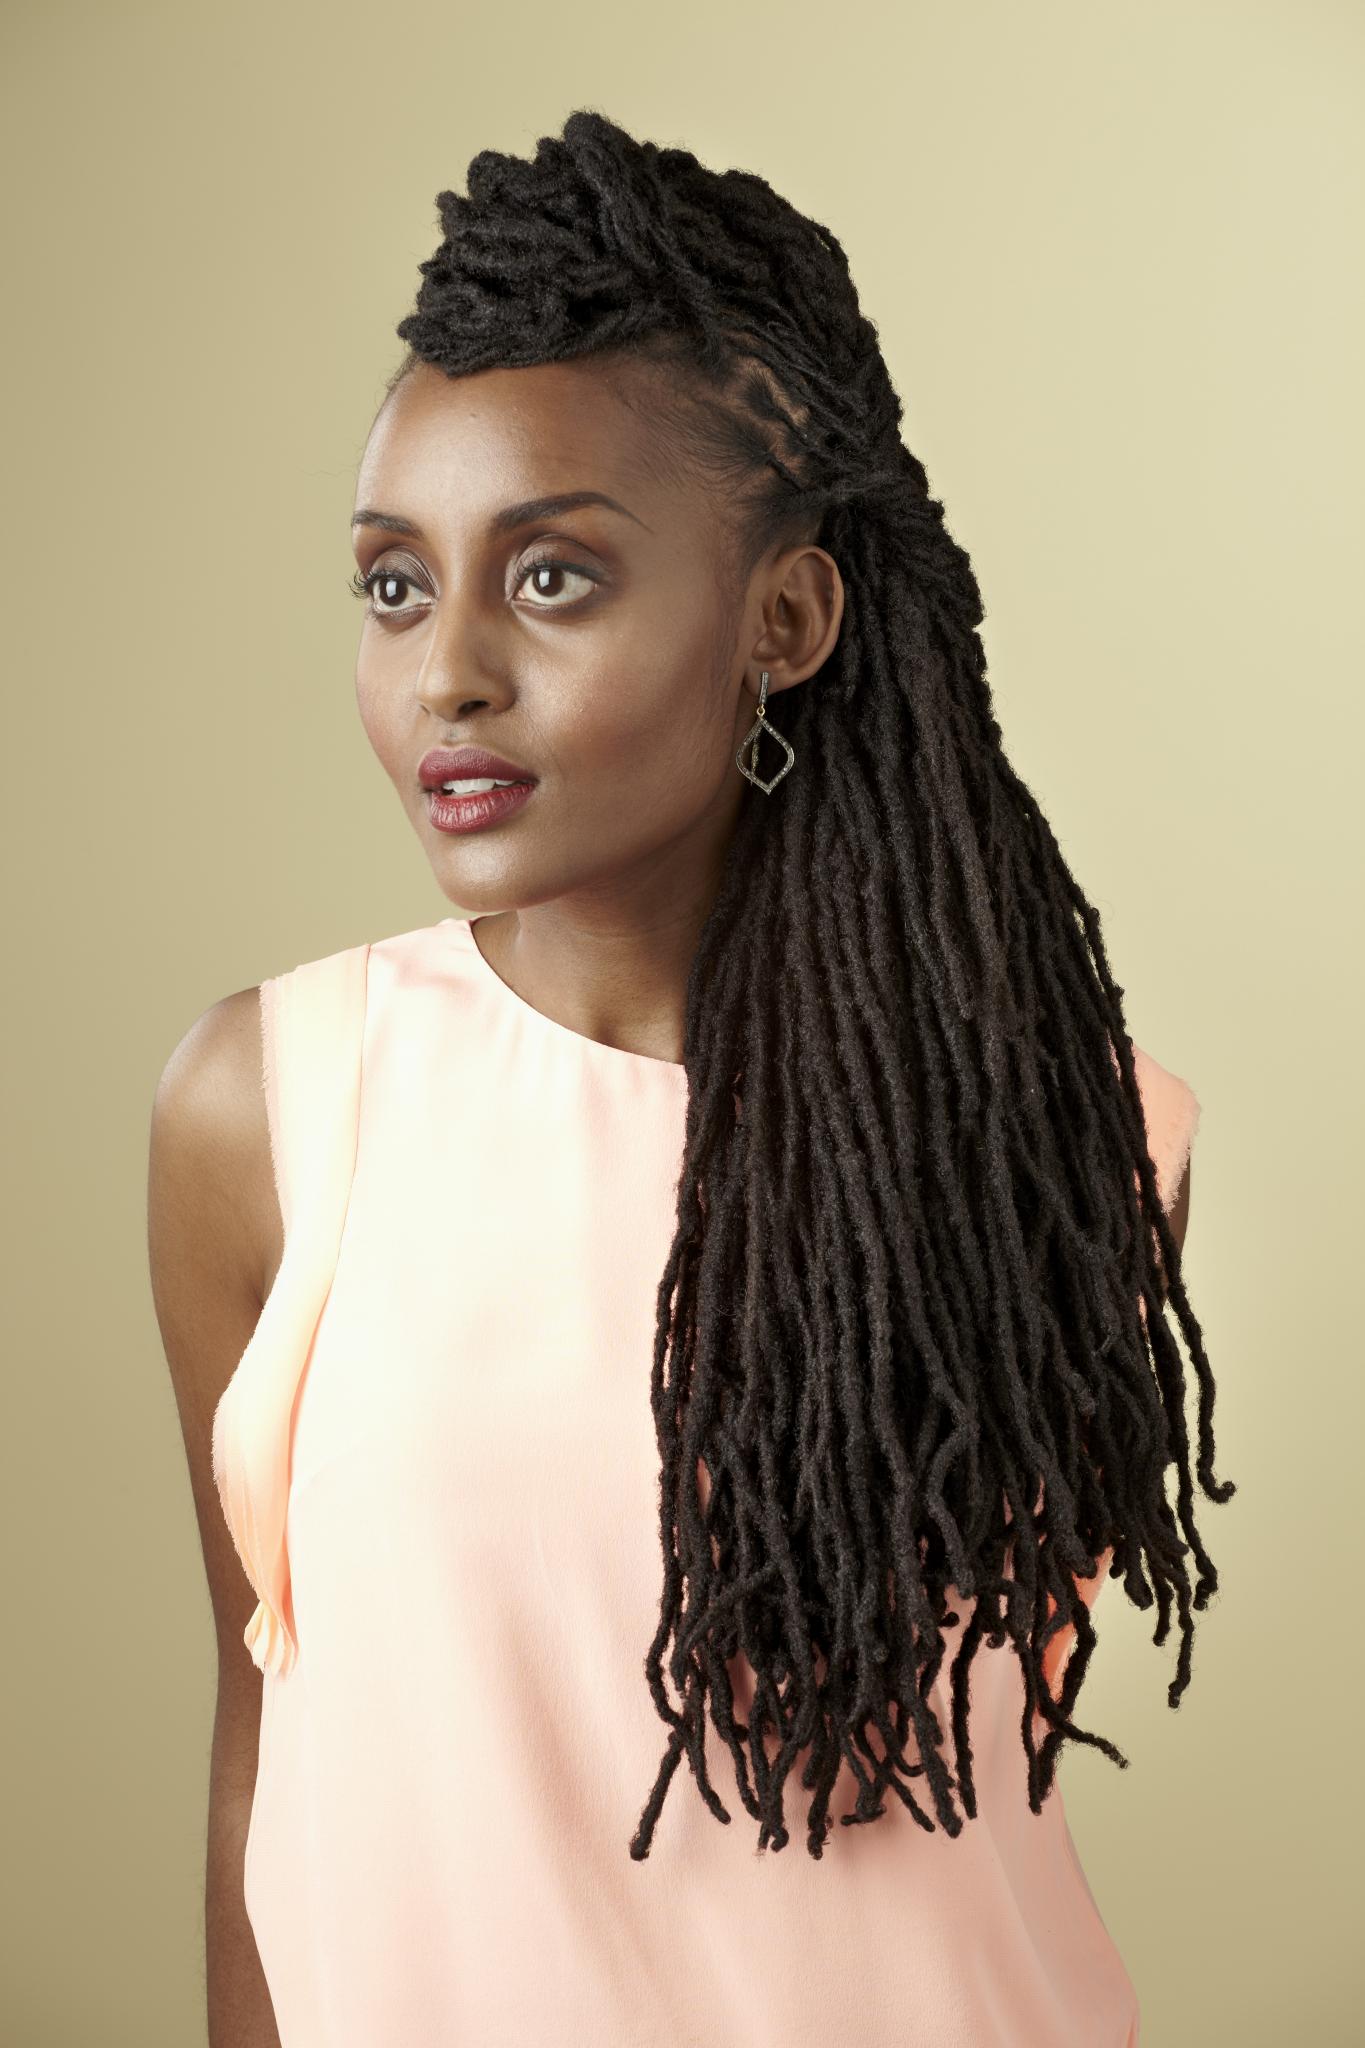 Ask The Experts: Stylish Locs